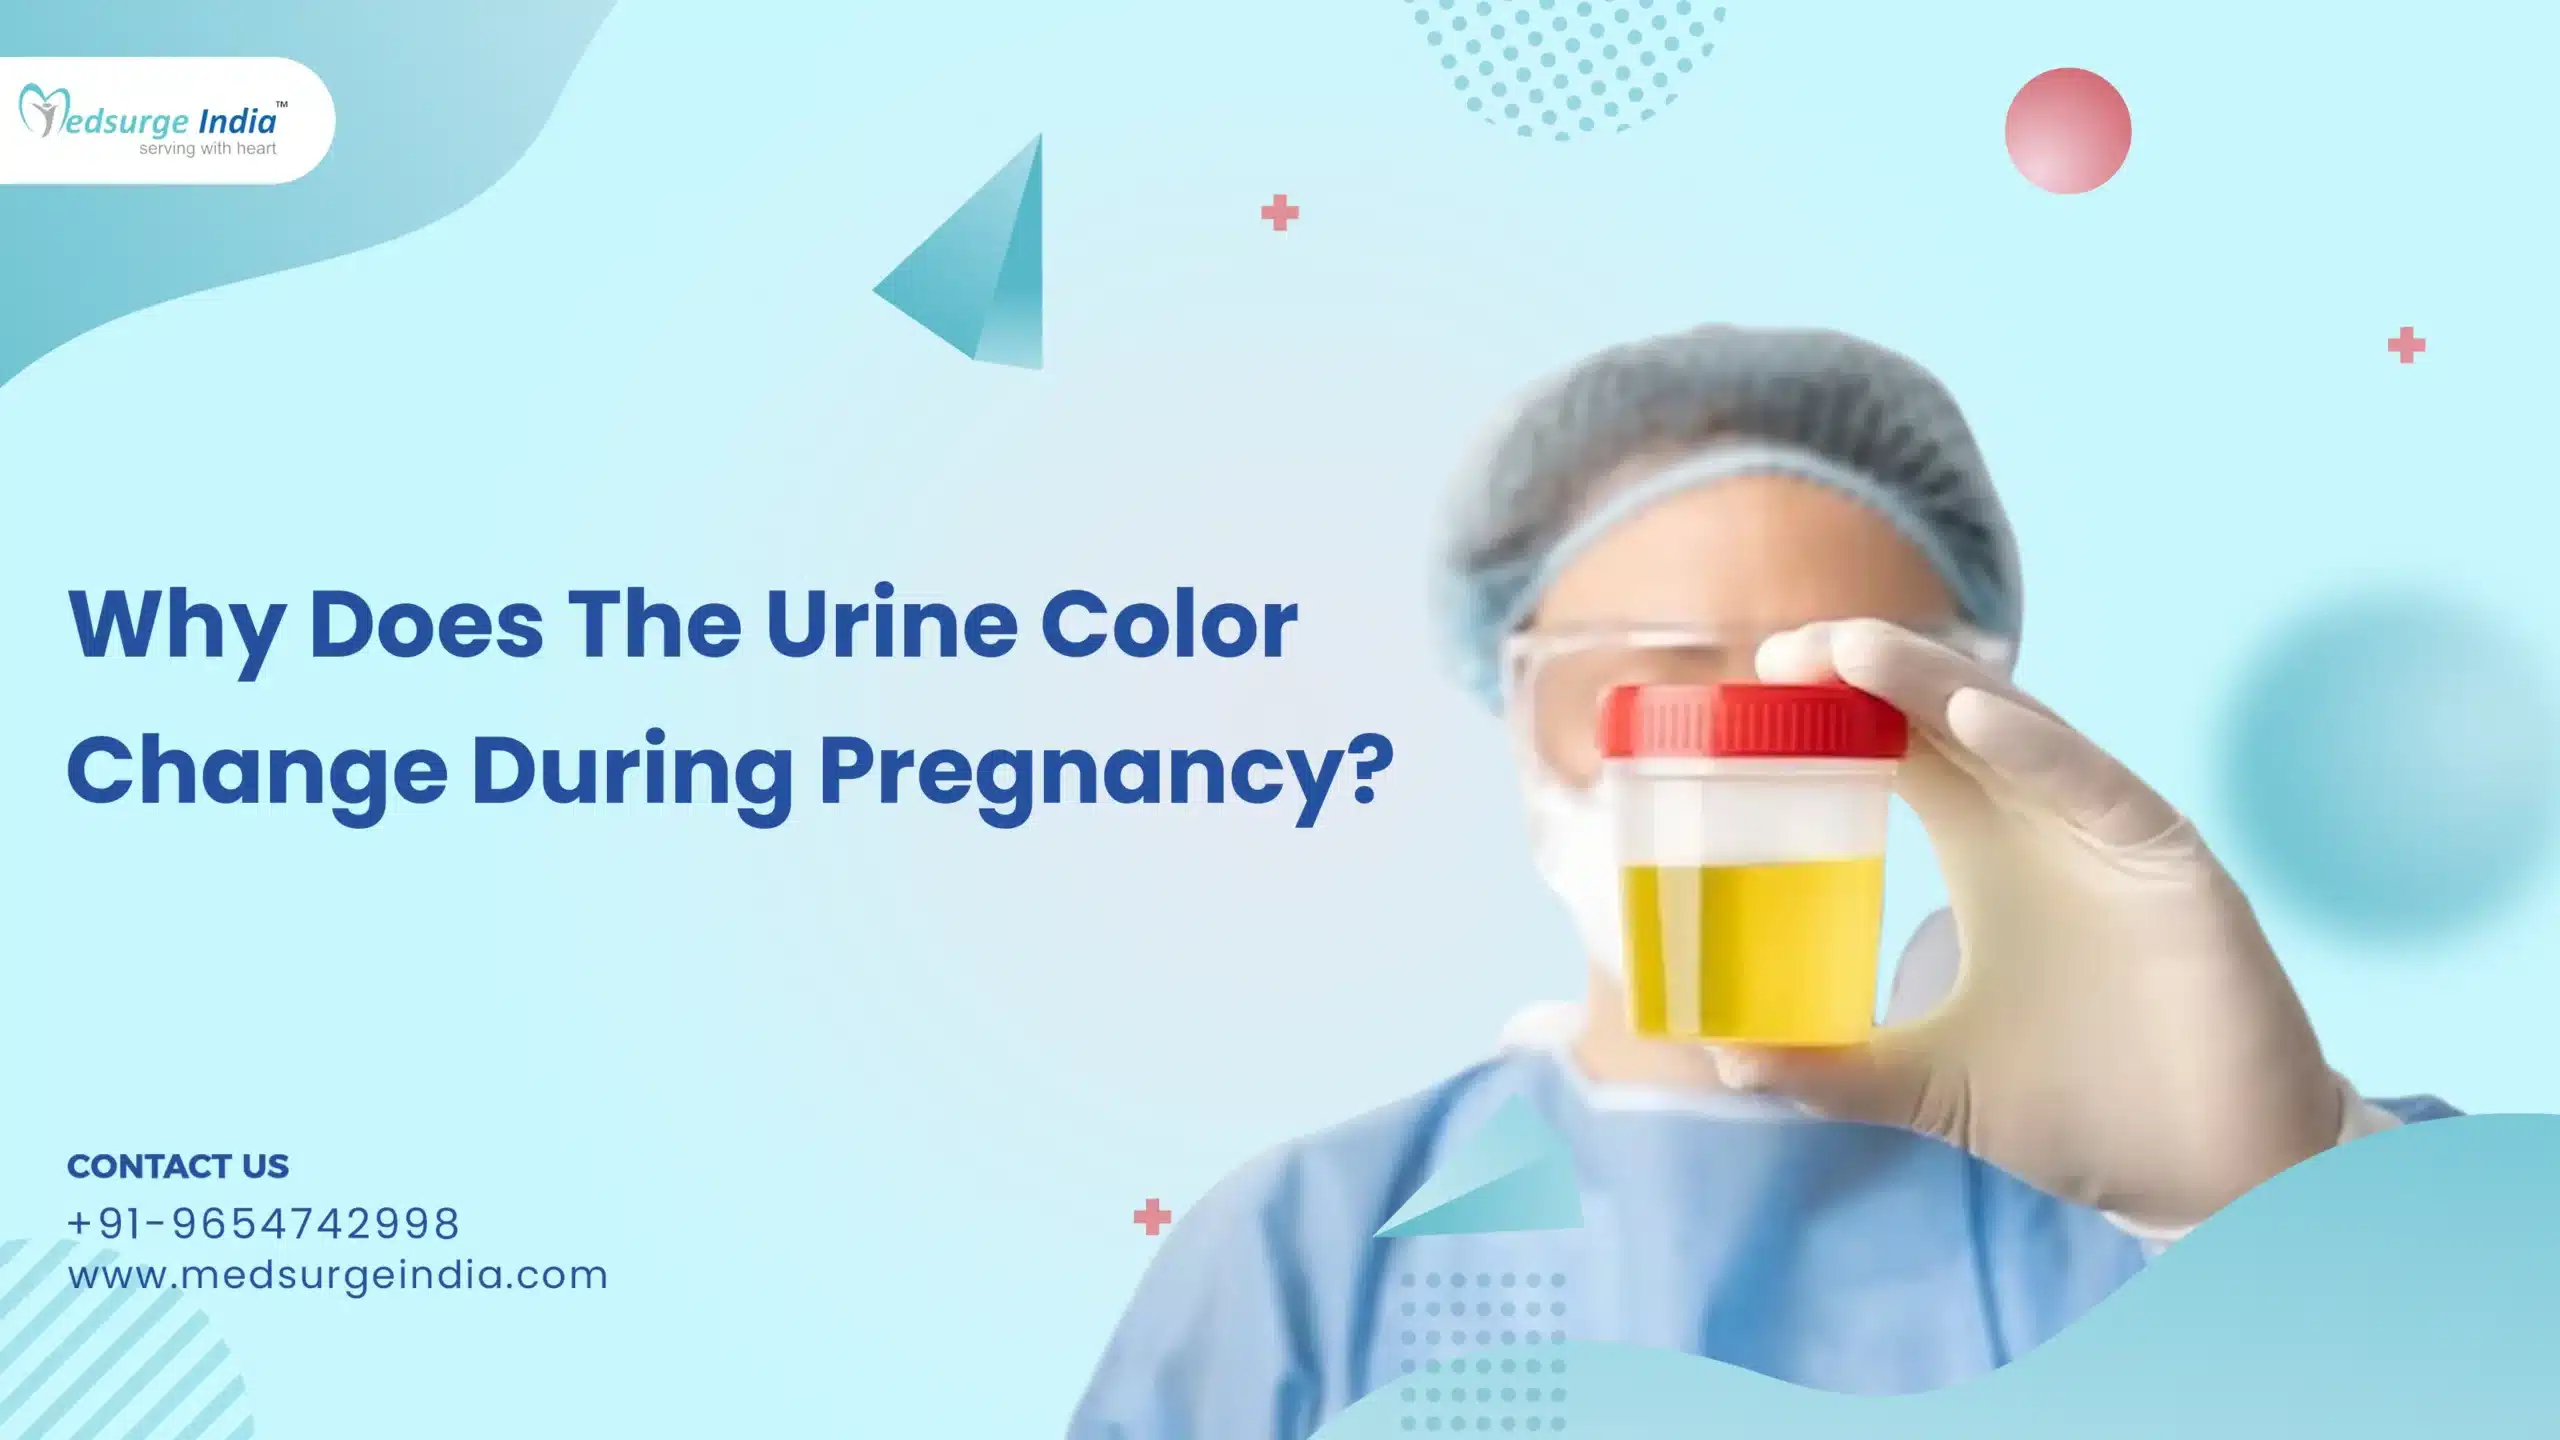 Why Does The Urine Color Change During Pregnancy?